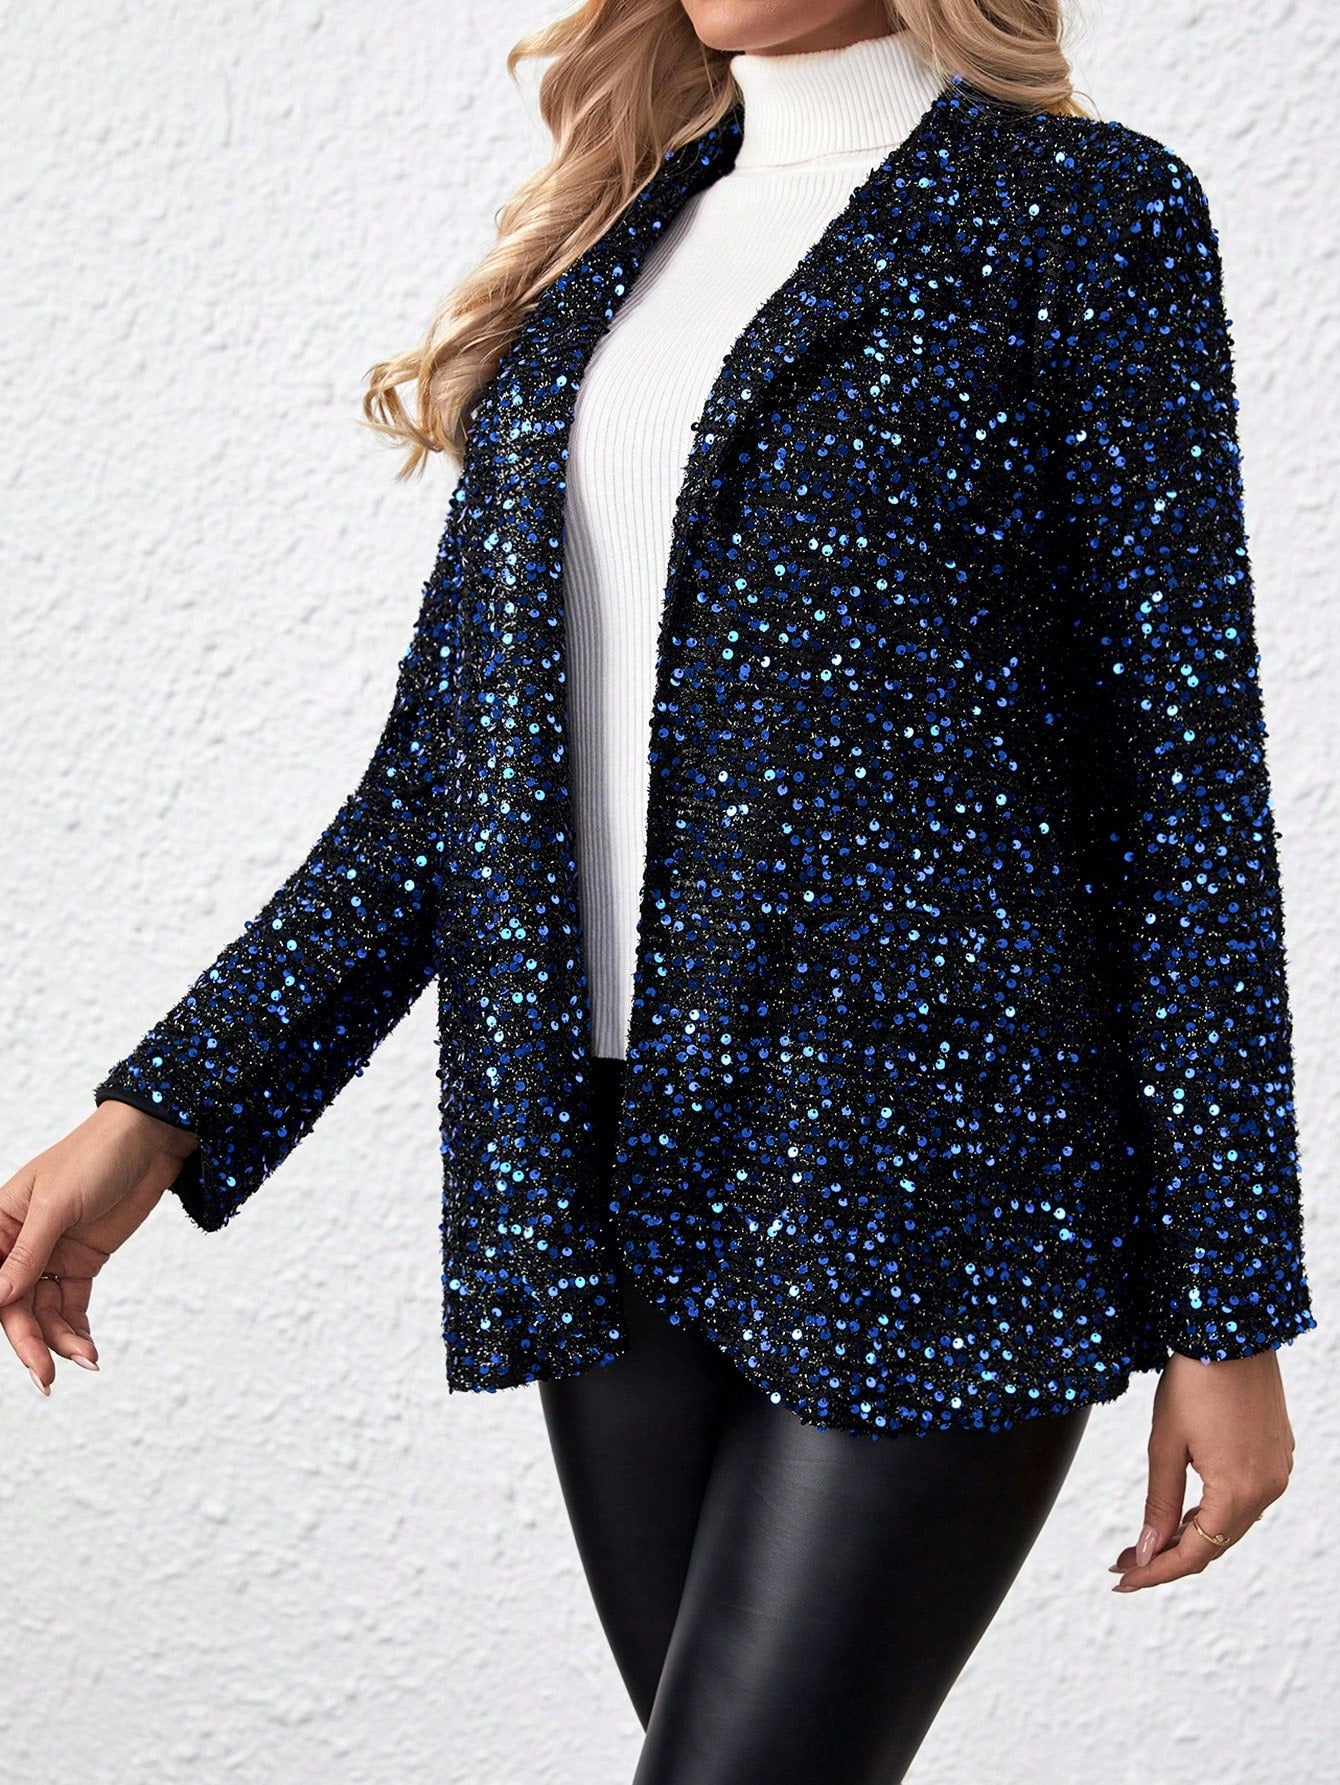 model wearing a Blue sparkly jacket walking for a professional pic